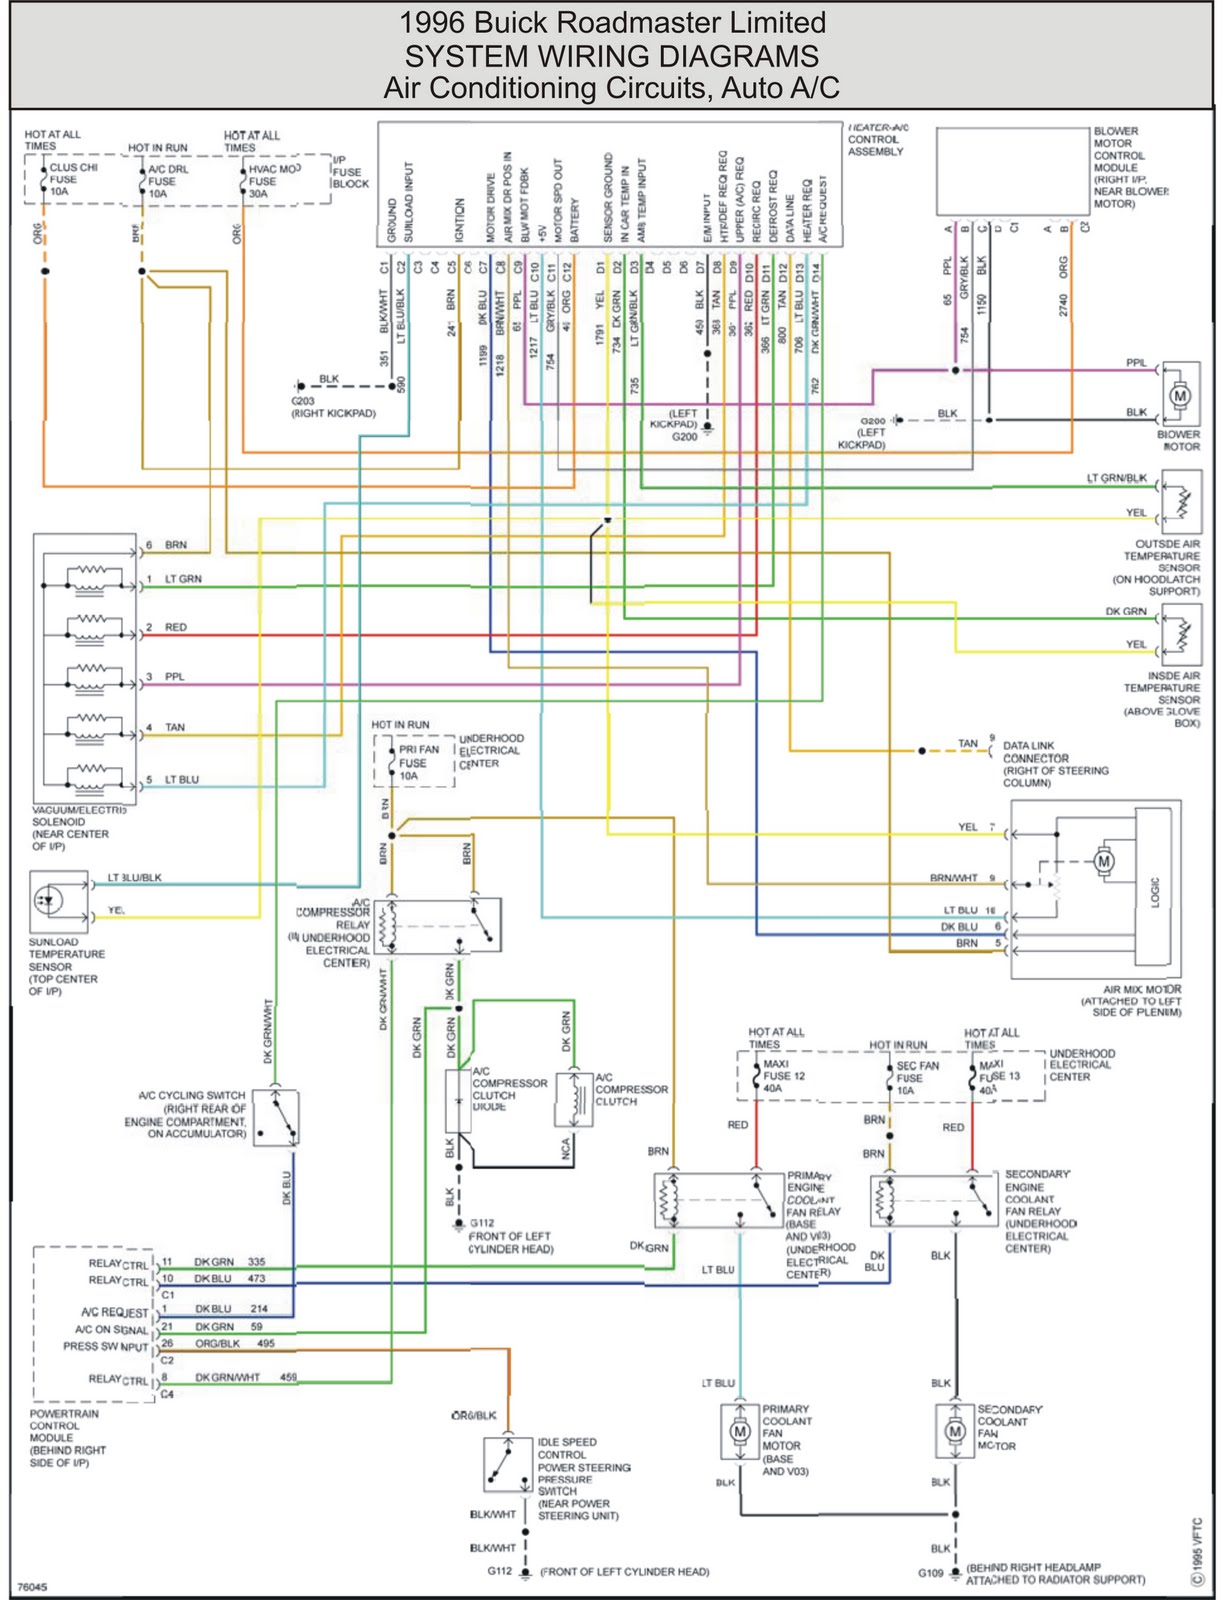 Automotive Air Conditioning Wiring Diagram from 2.bp.blogspot.com